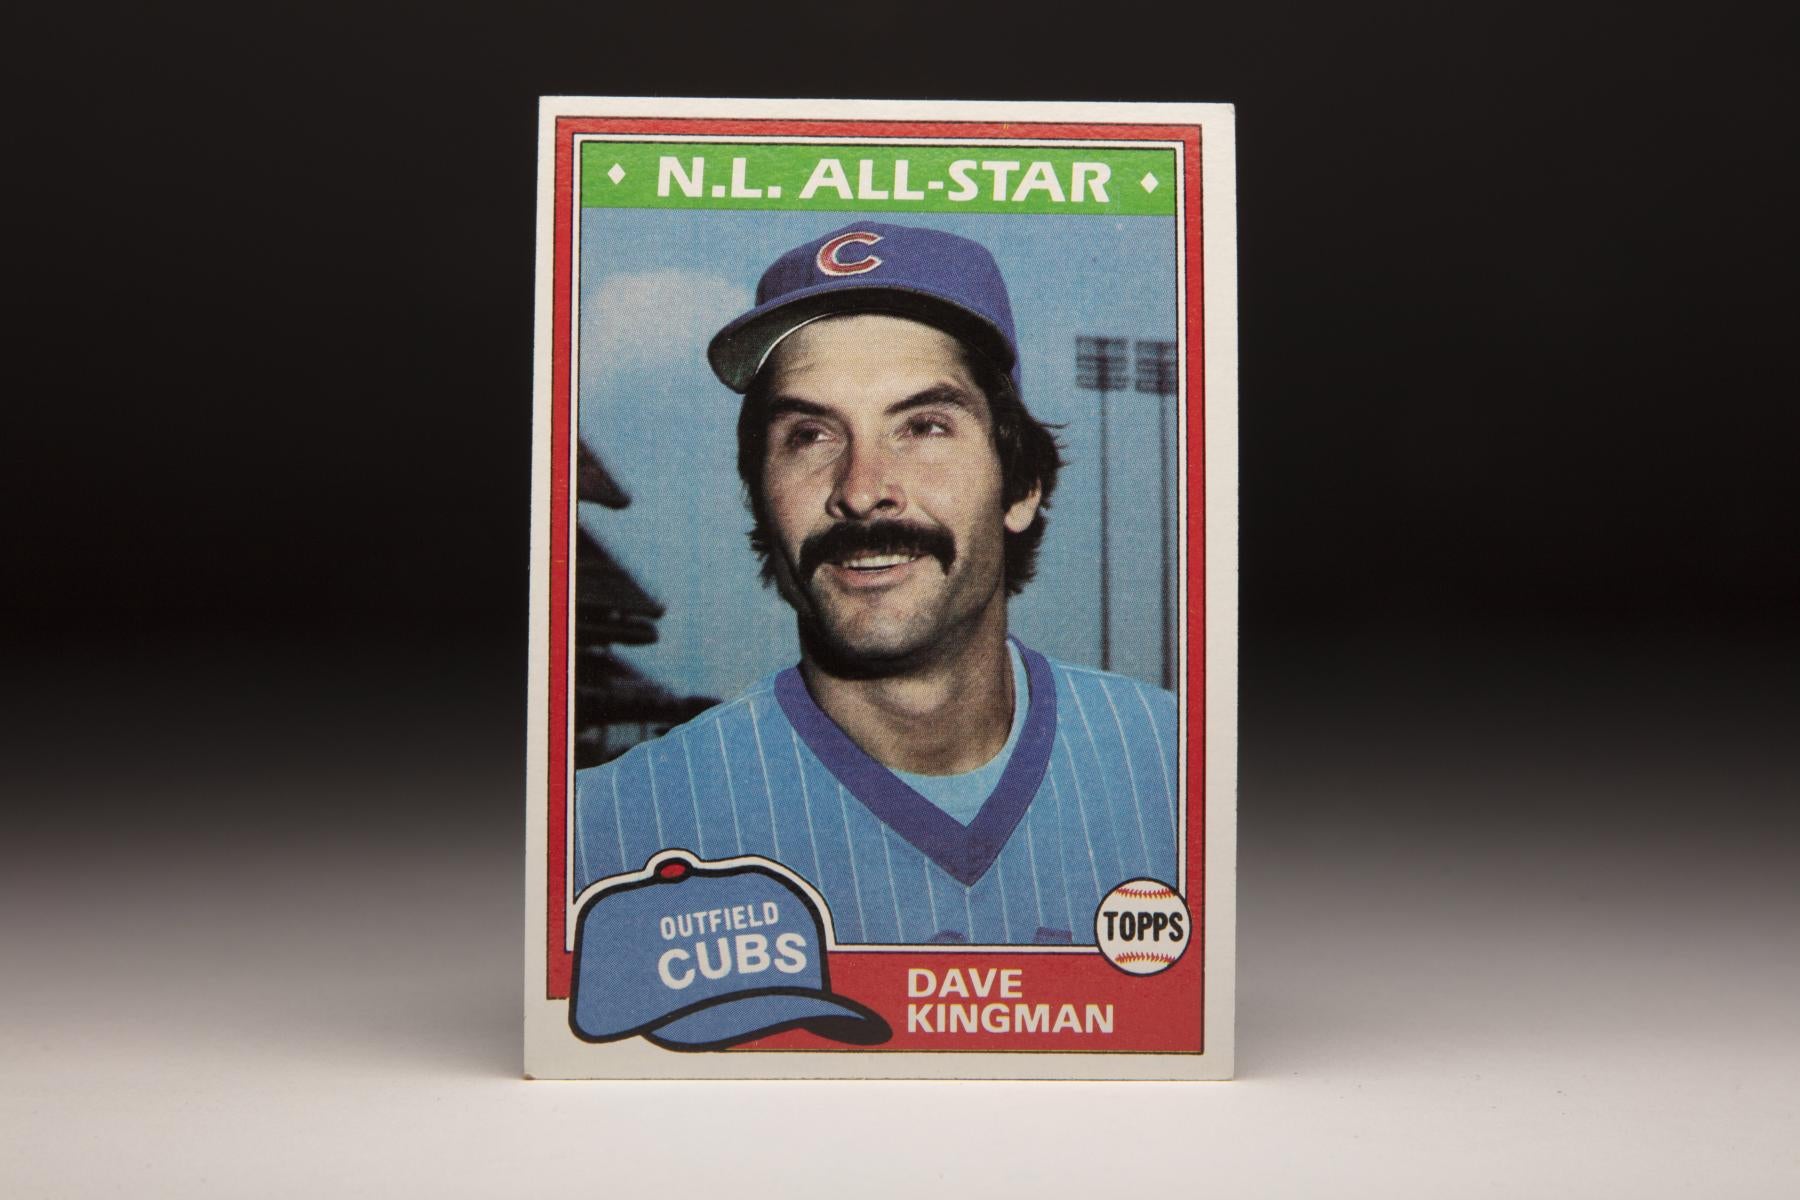 The Cubs' Dave Kingman continues his slugging with a single and